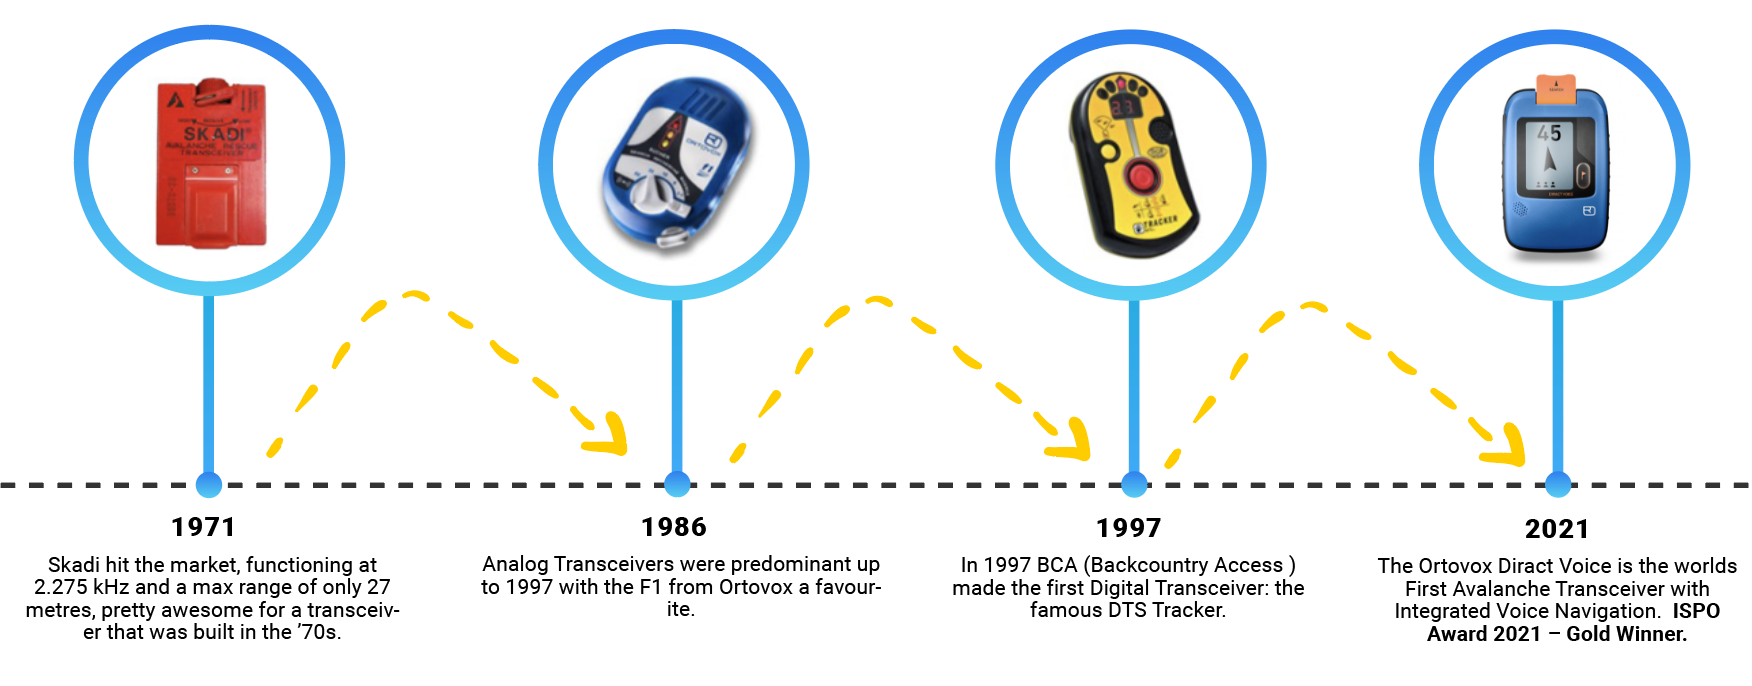 History of Avalanche Transceivers and how they have Evolved 🤳